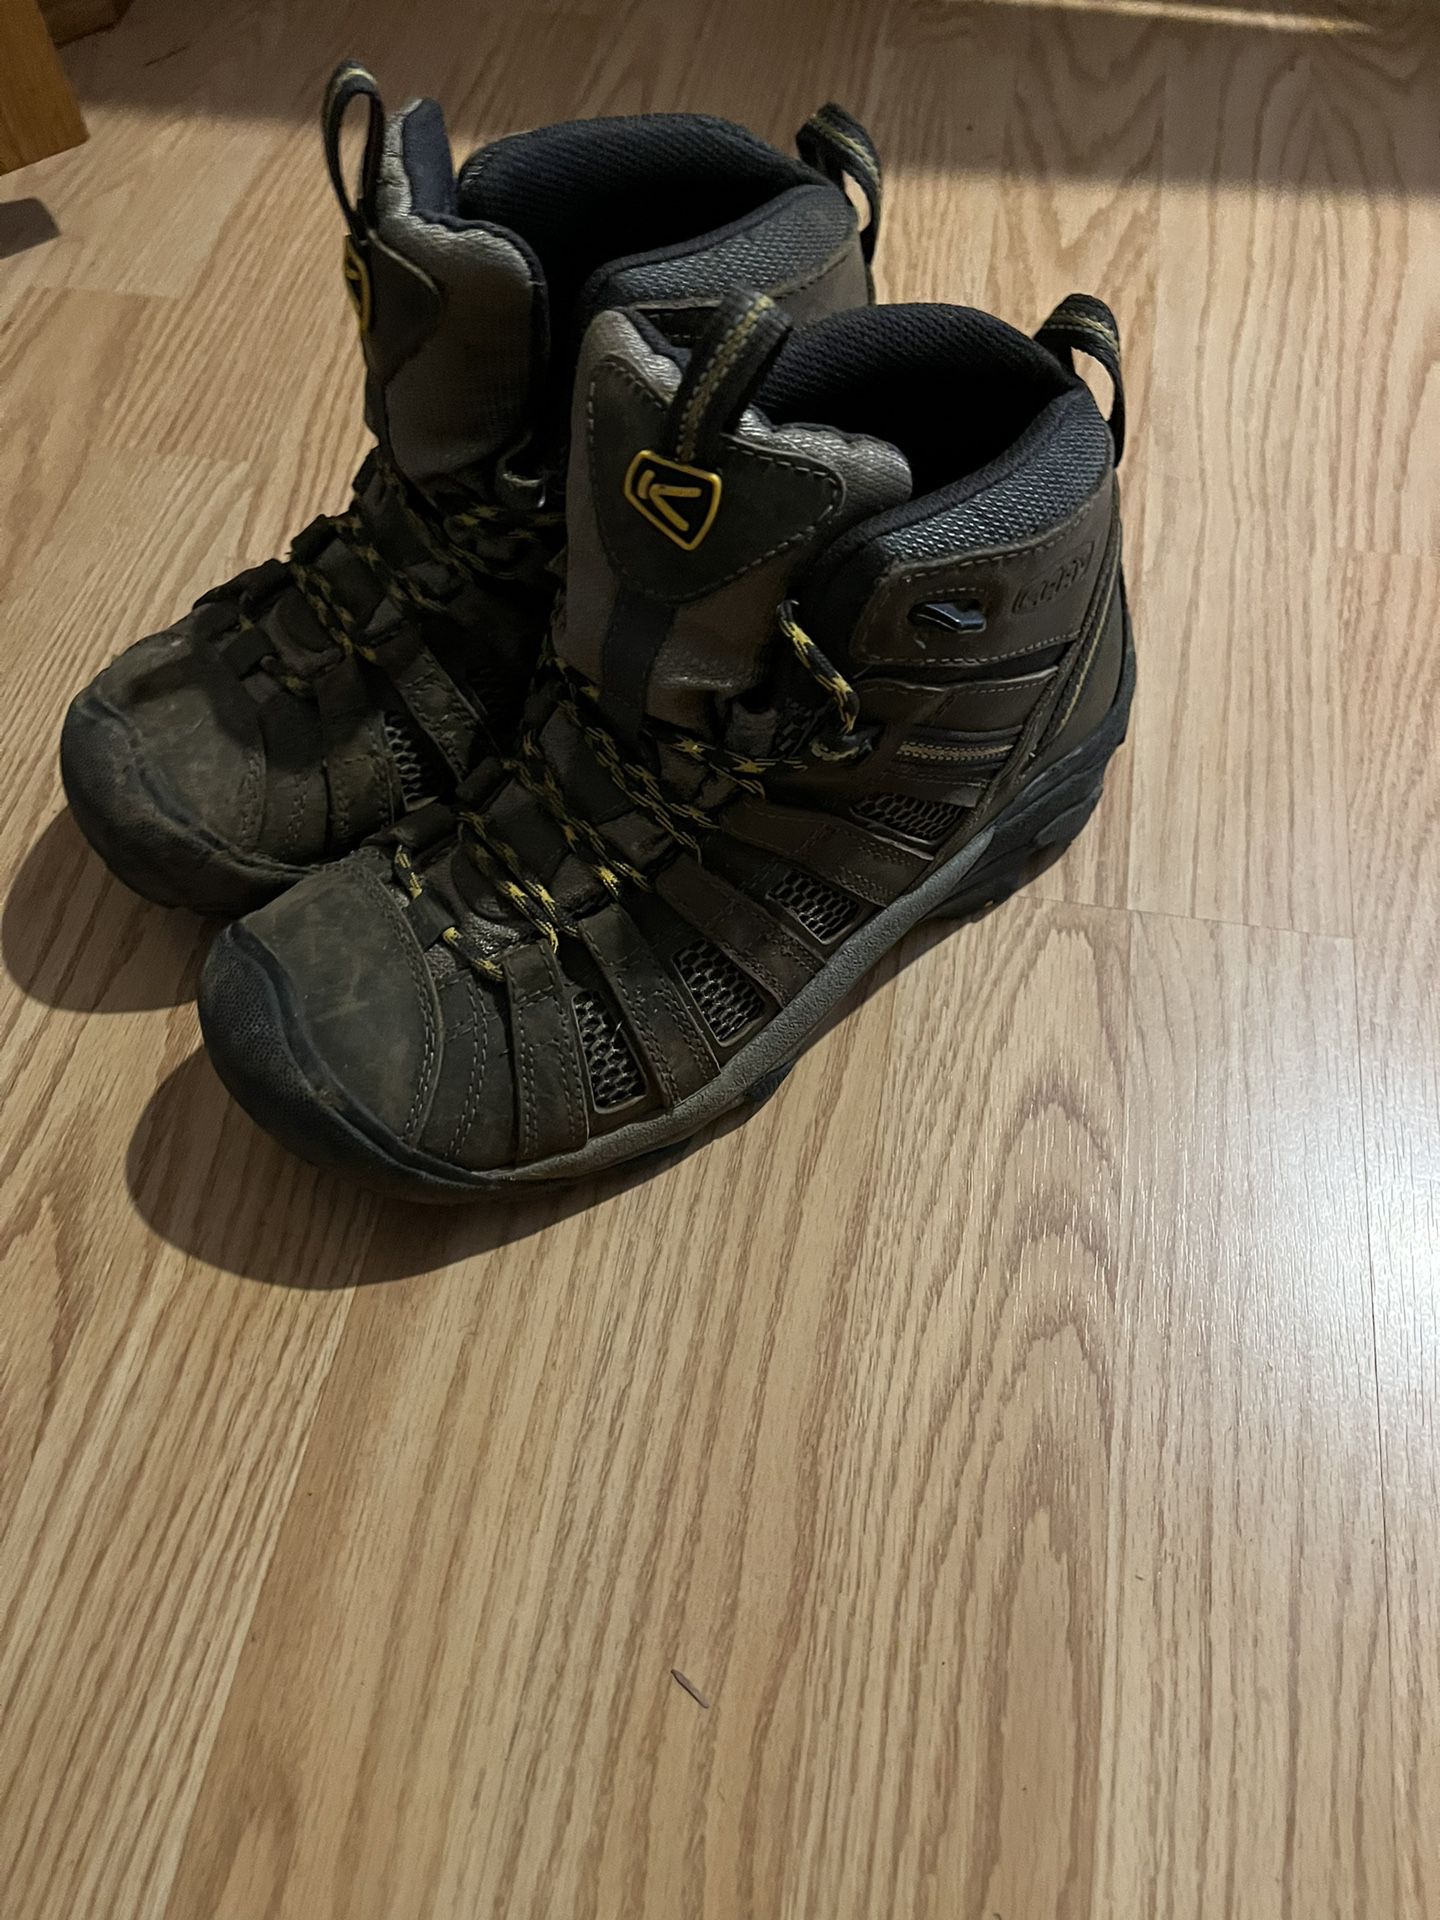 Boys Size 7 Keen Hiking Boots